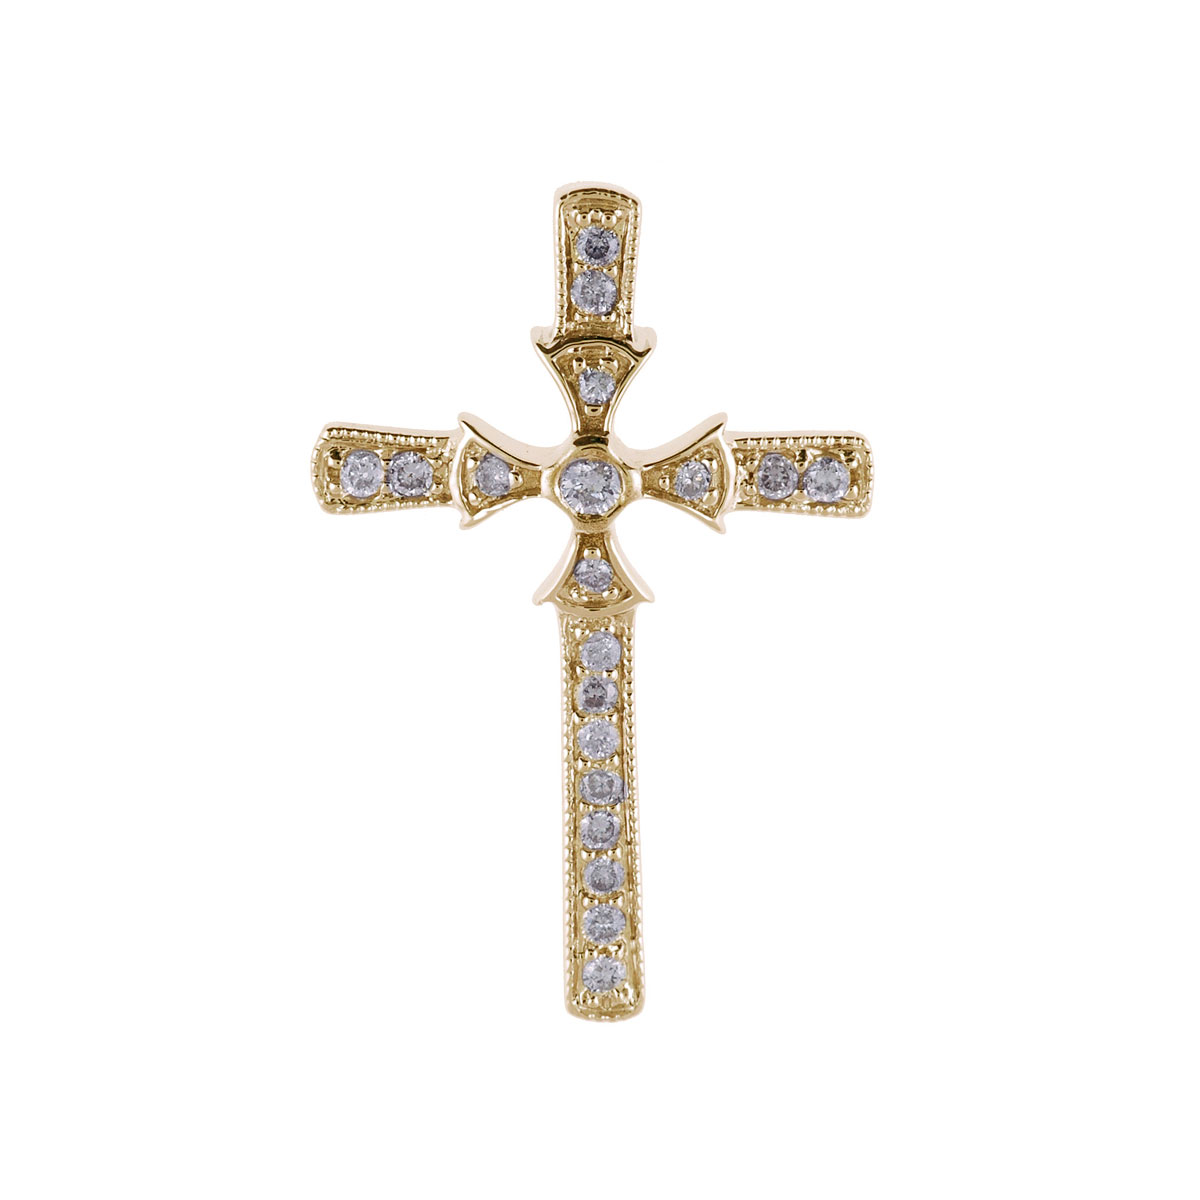 A simple and modern .20 ct diamond cross in 14k yellow gold.